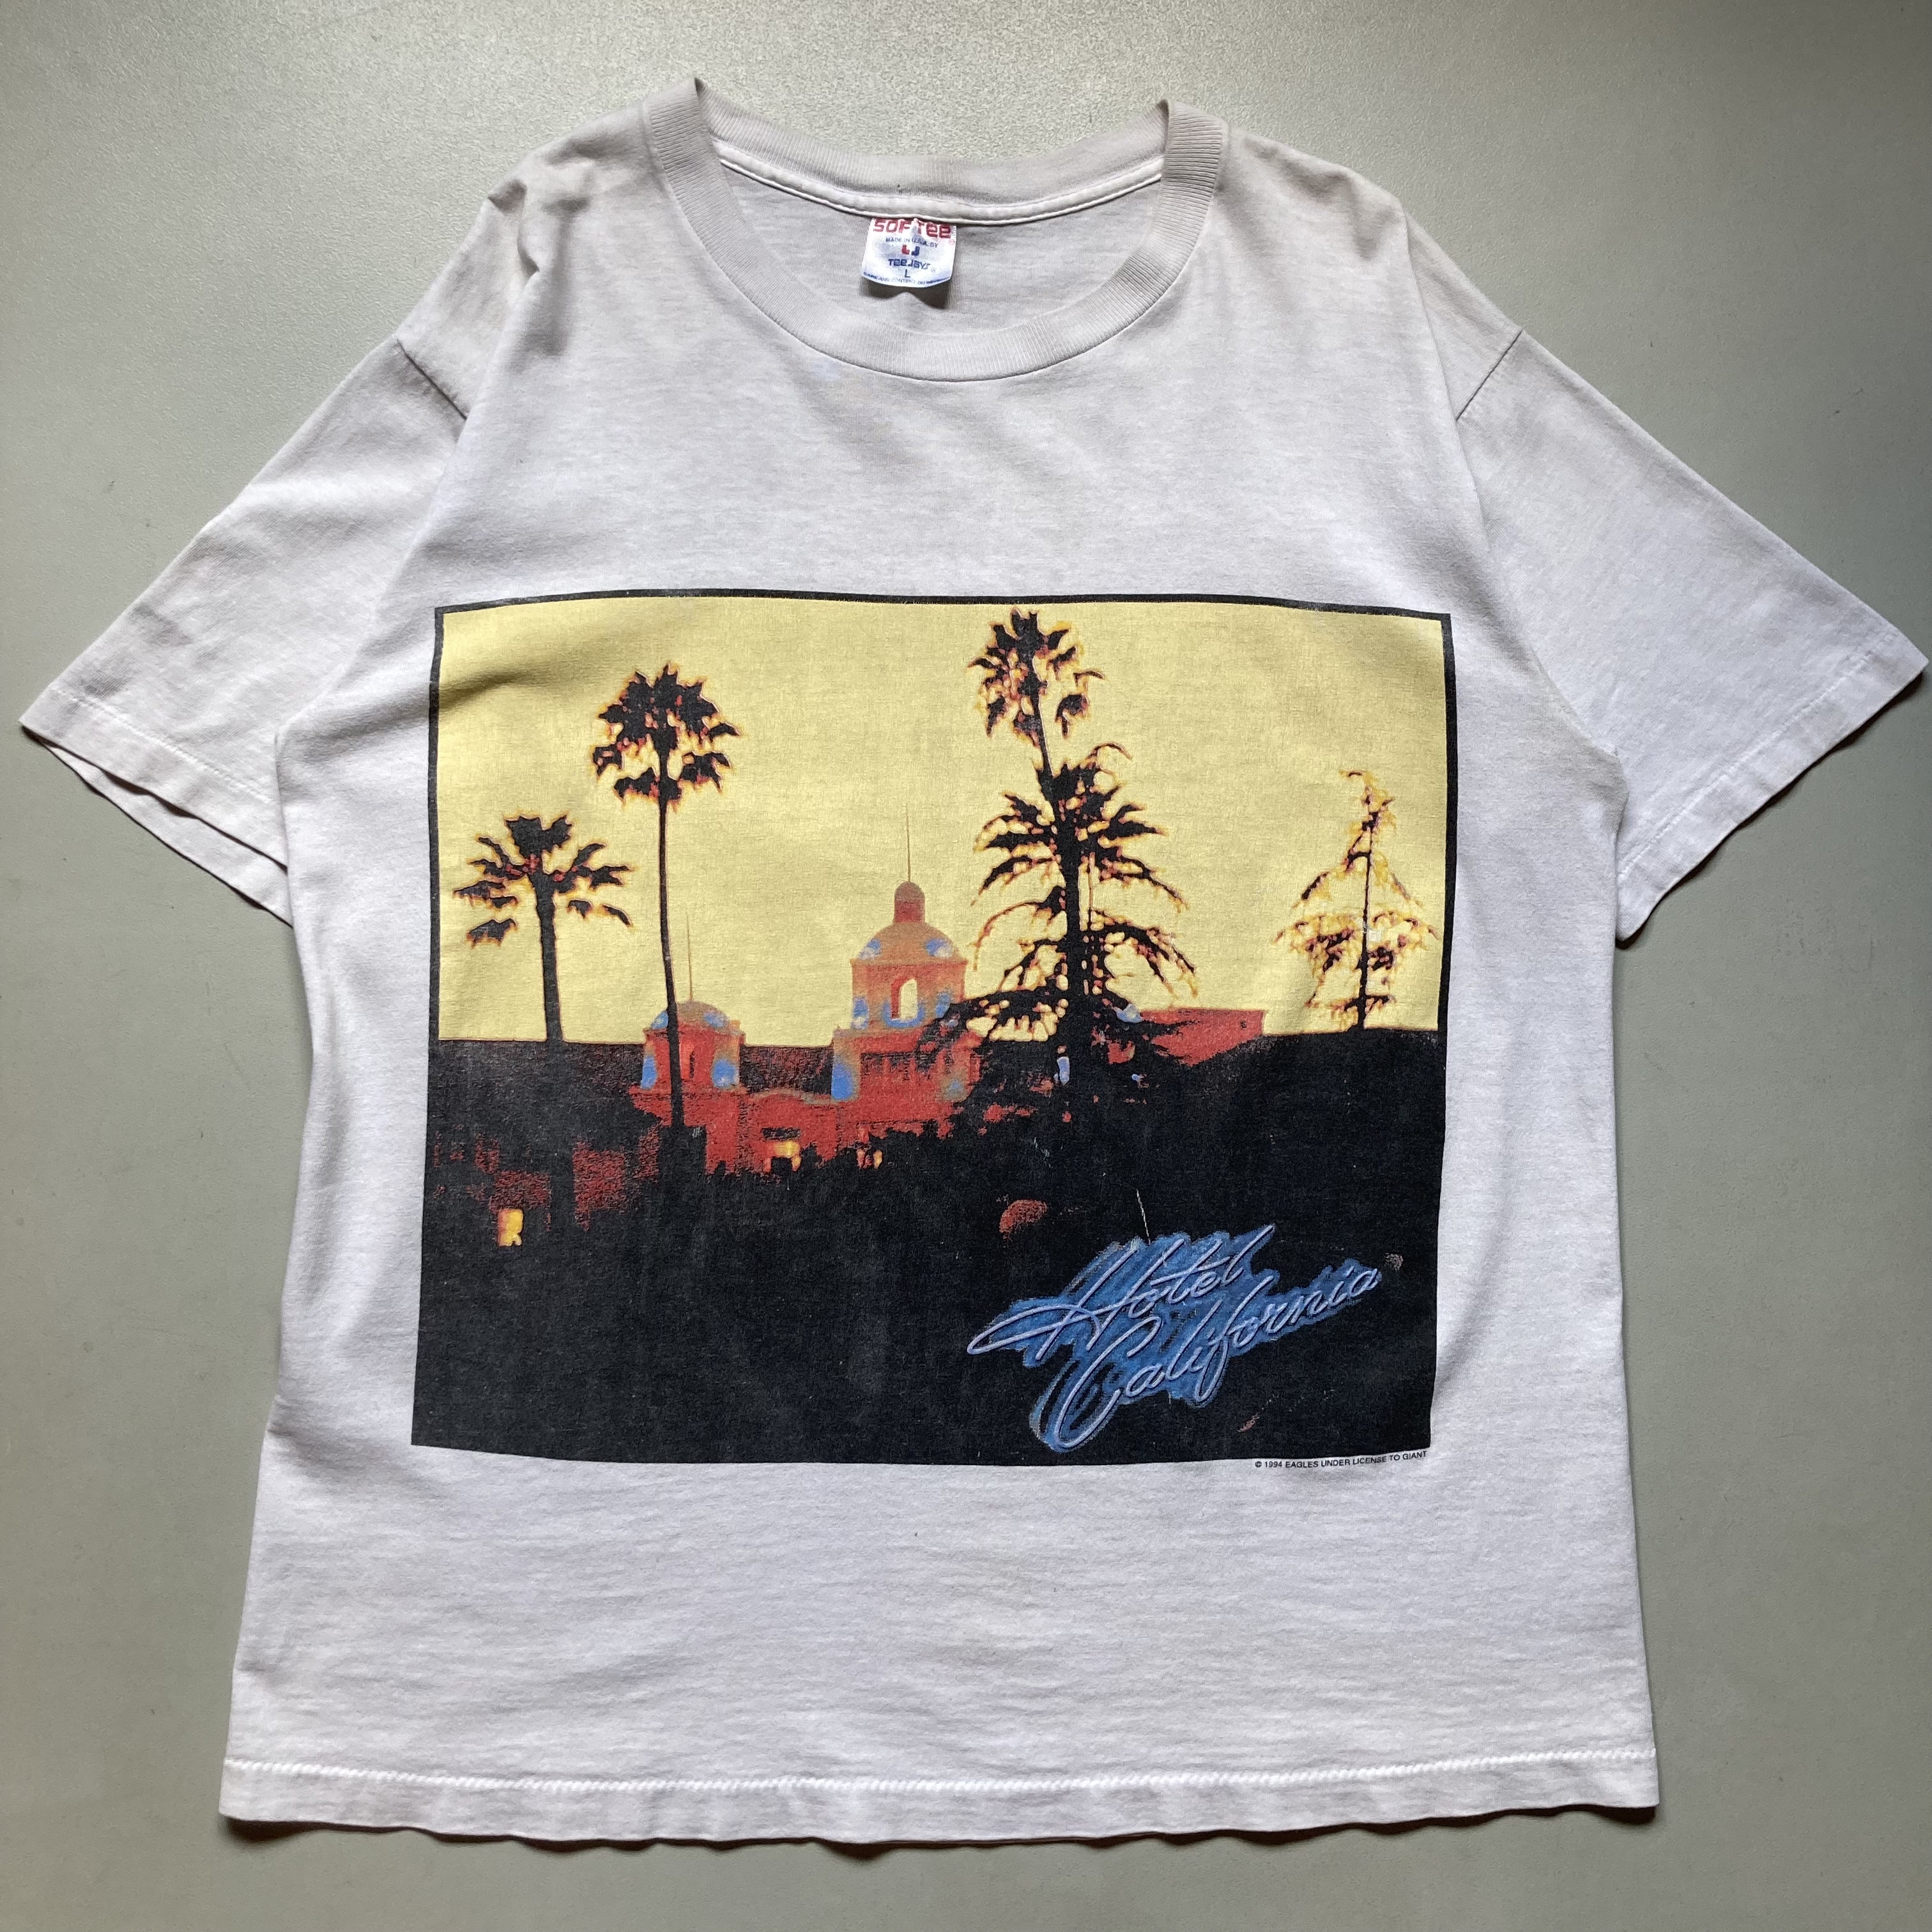 90s eagles band T-shirt 「Hotel California 」 「Hell freeze over 